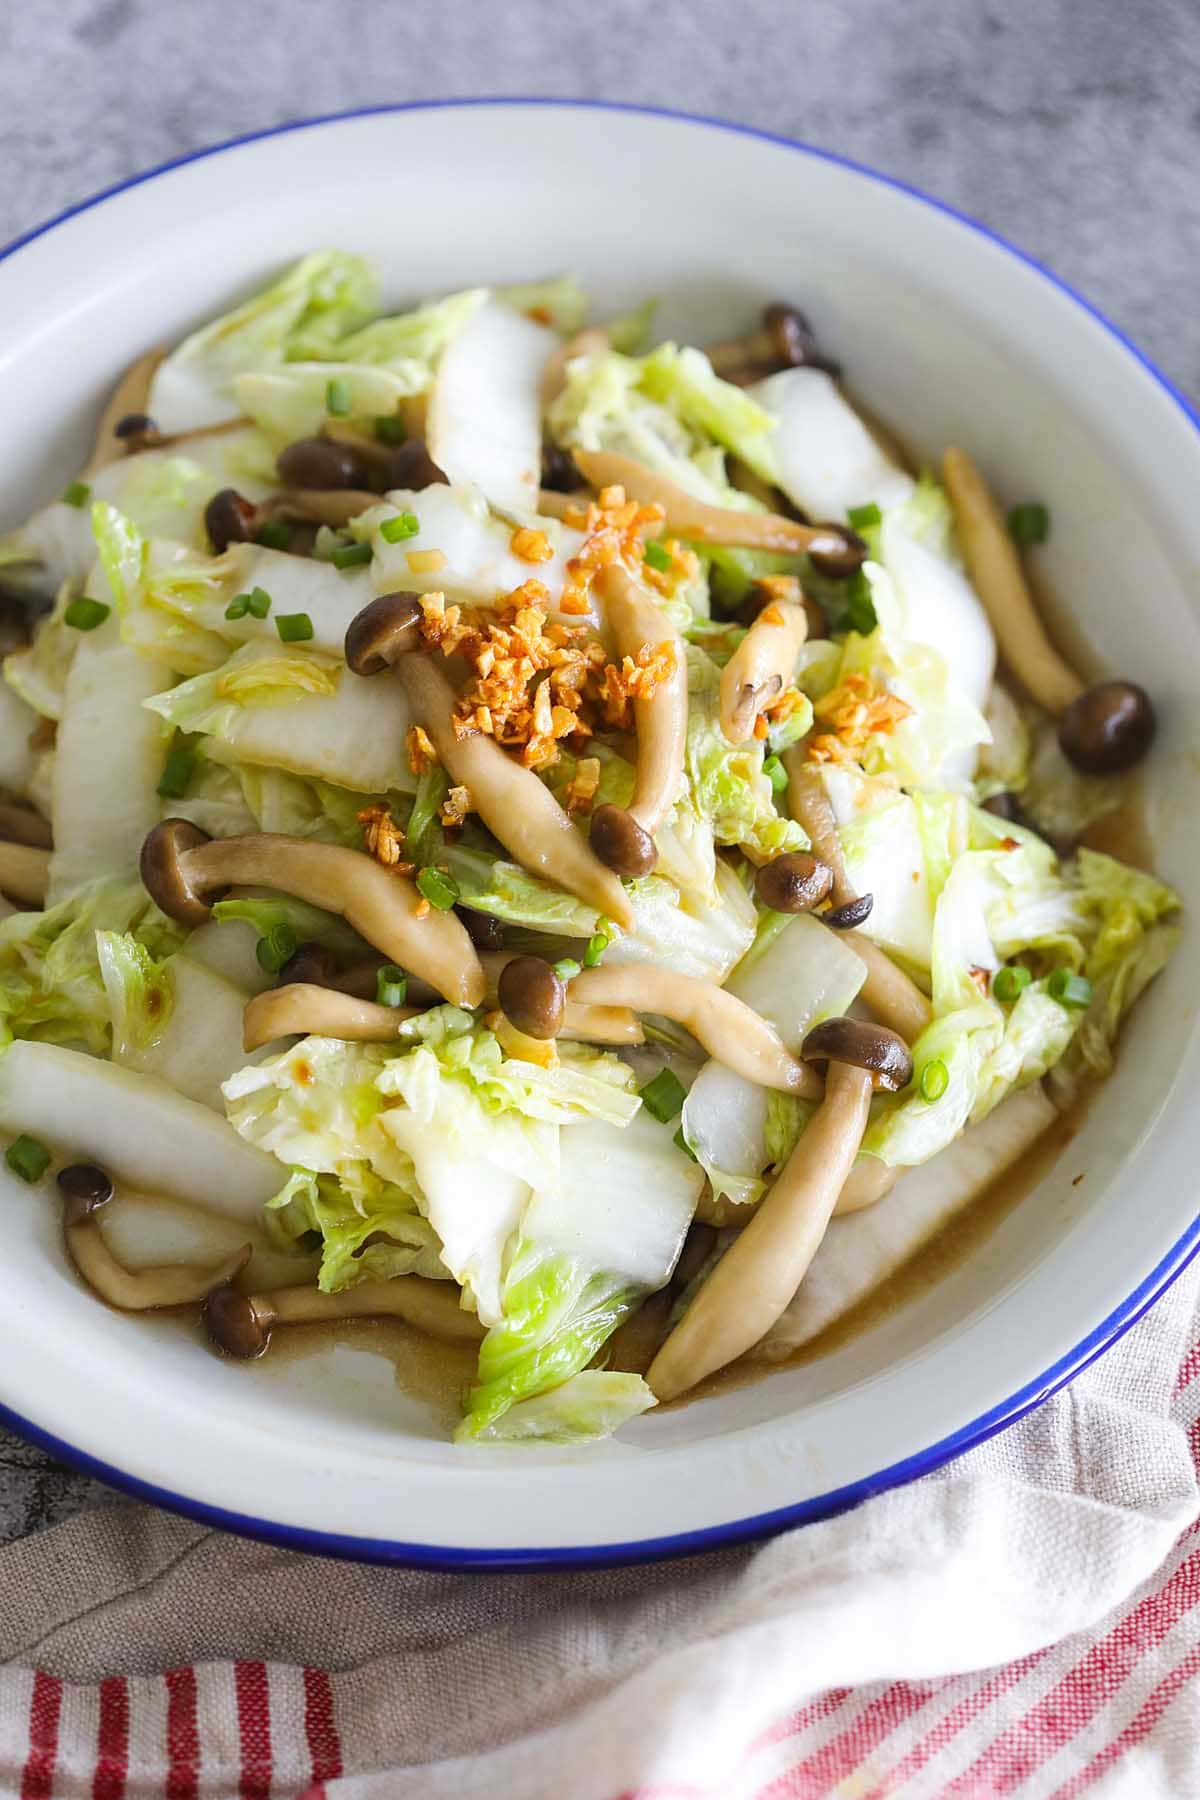 One of the easiest Napa cabbage recipes is Napa cabbage stir fry with mushroom.